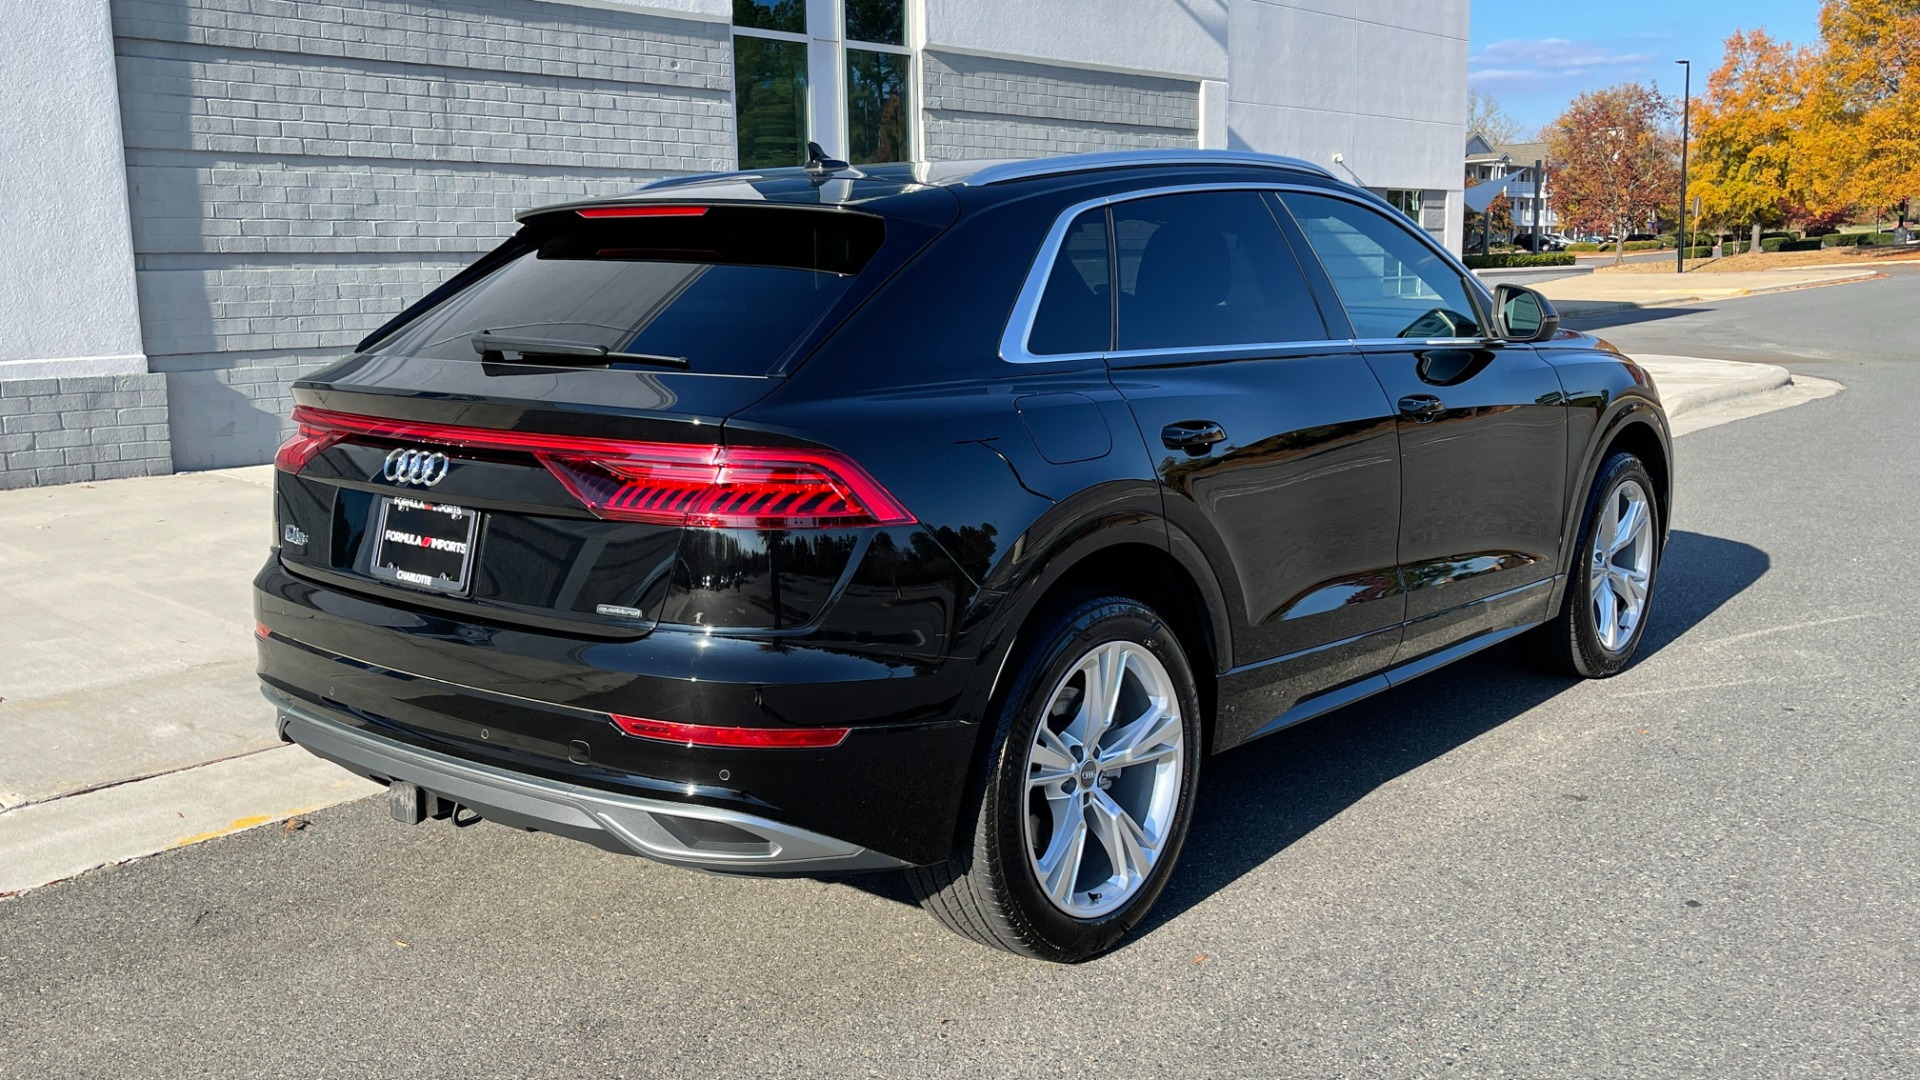 Used 2019 Audi Q8 PREMIUM / QUATTRO / CONVENIENCE PACKAGE / COLD WEATHER / 21IN WHEELS for sale $46,995 at Formula Imports in Charlotte NC 28227 4